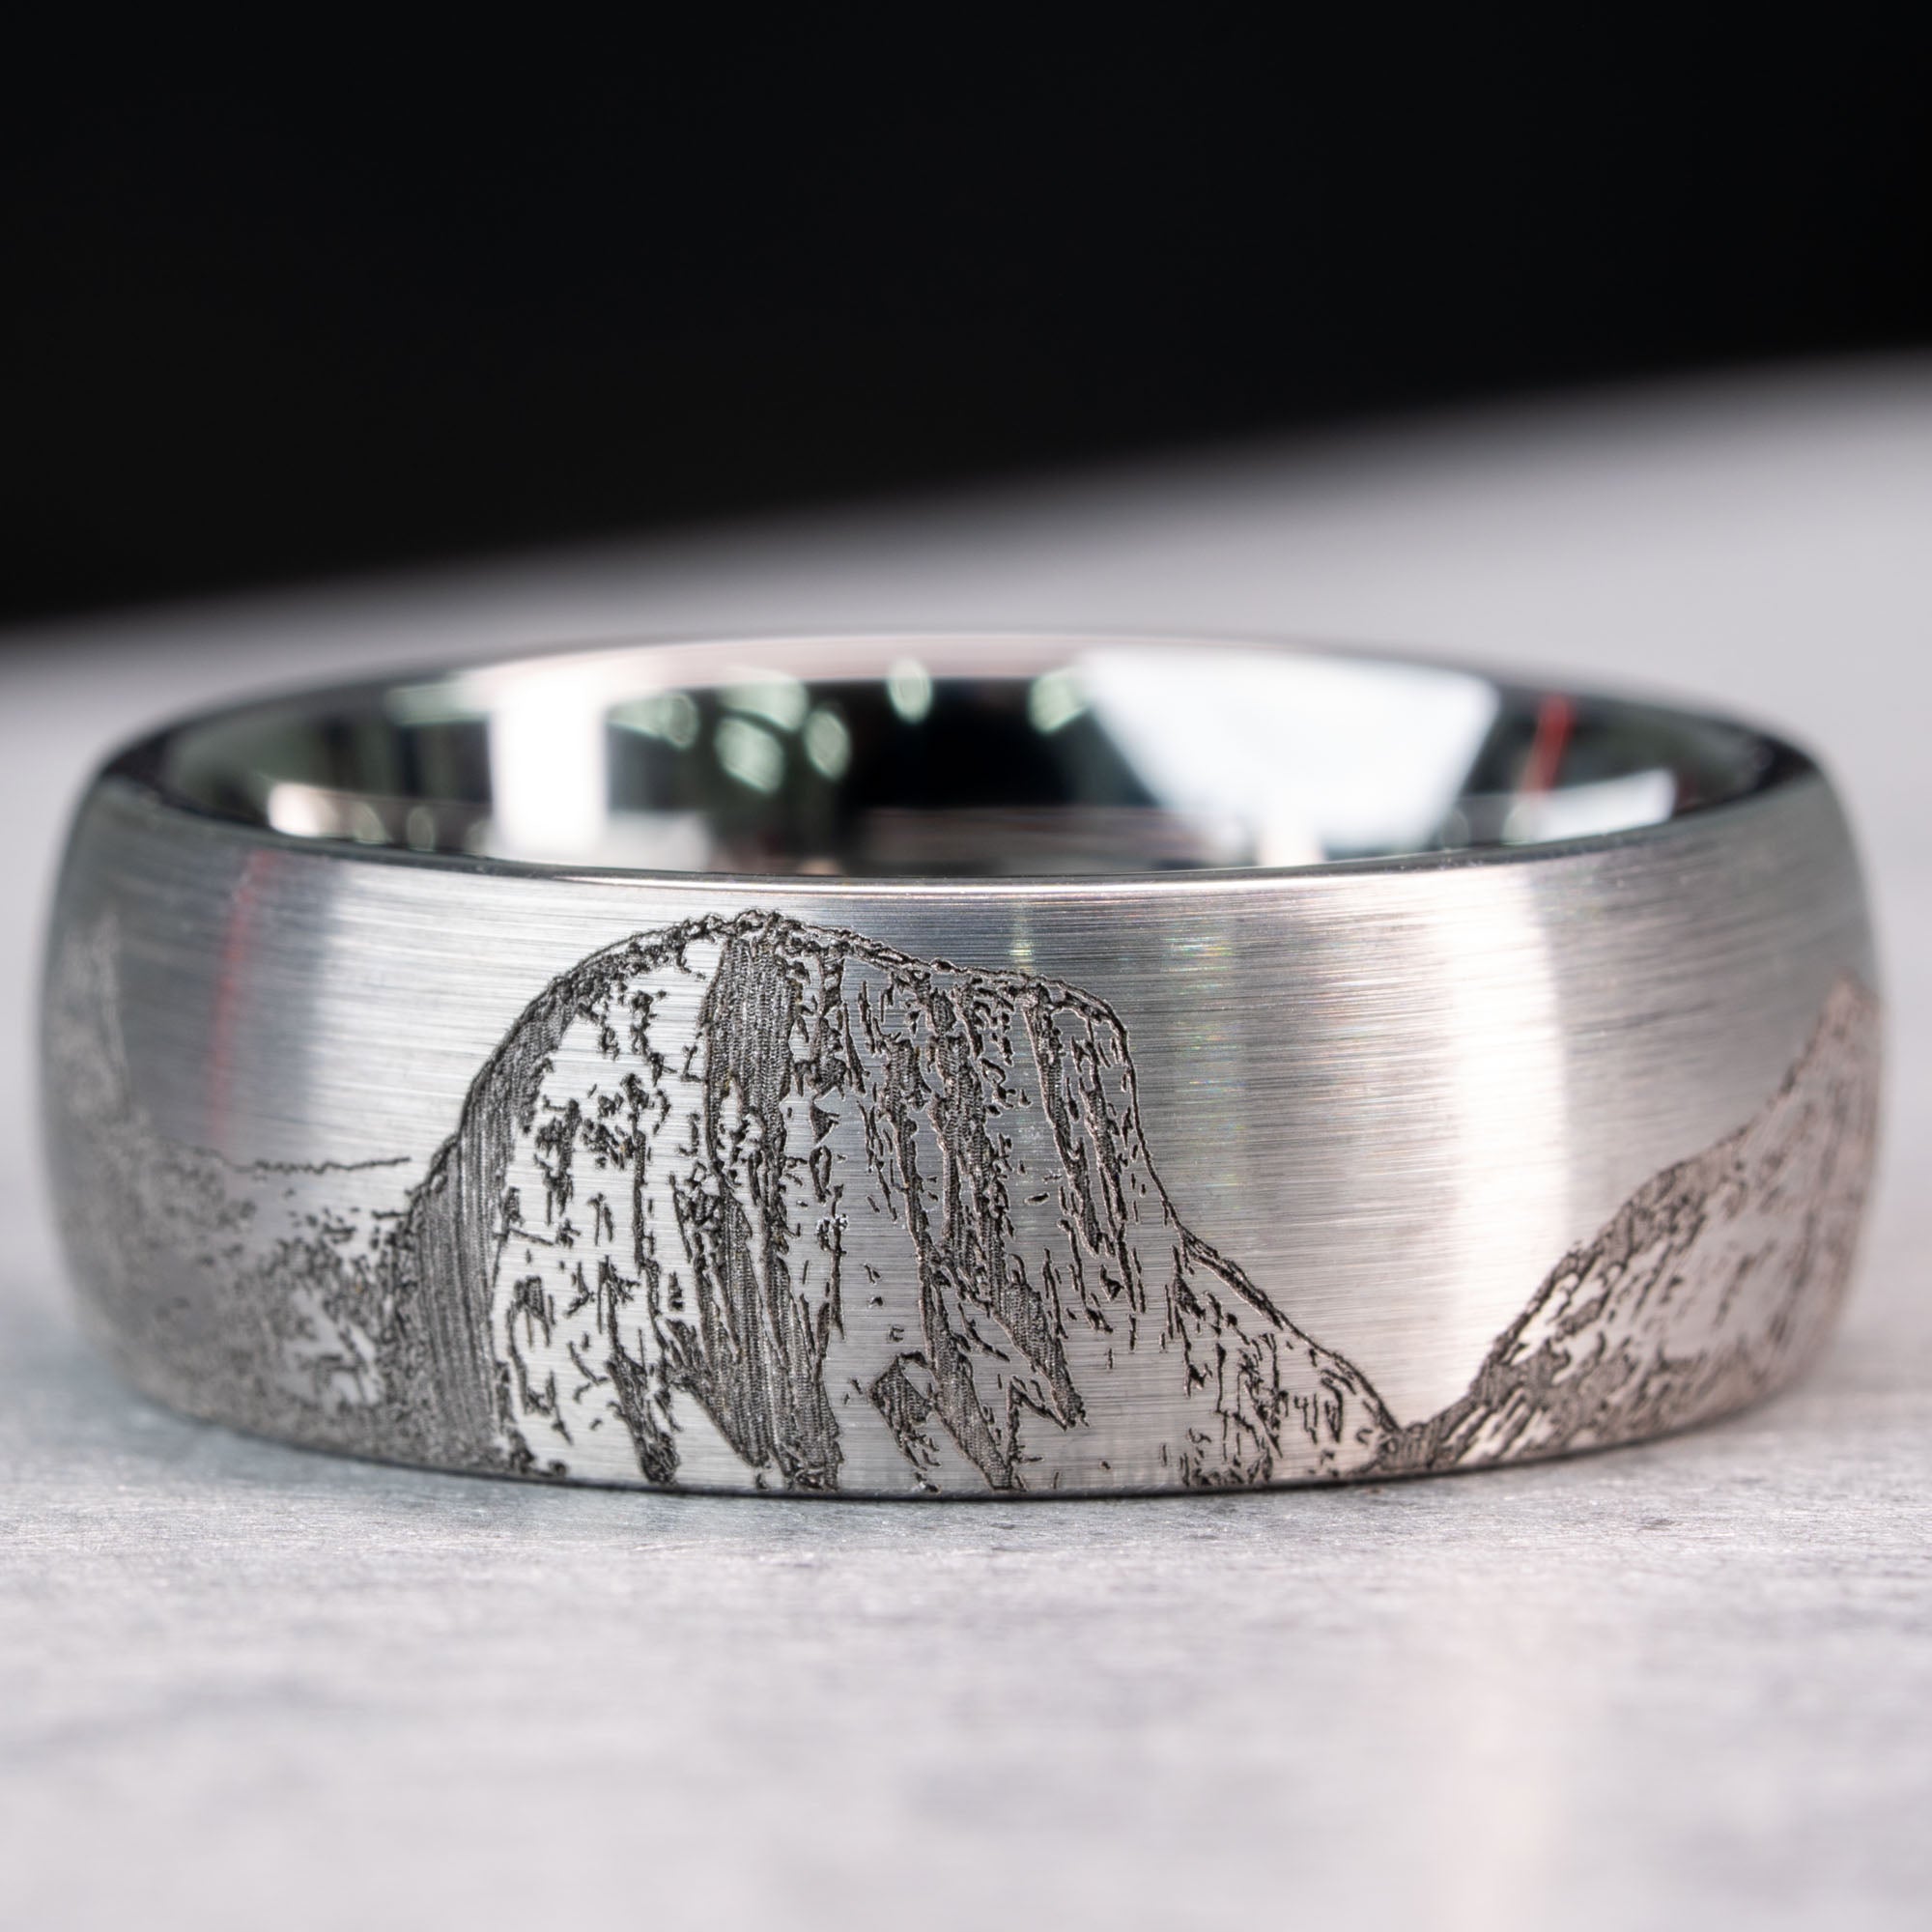 Domed Tungsten Engraved Yosemite National Park Ring